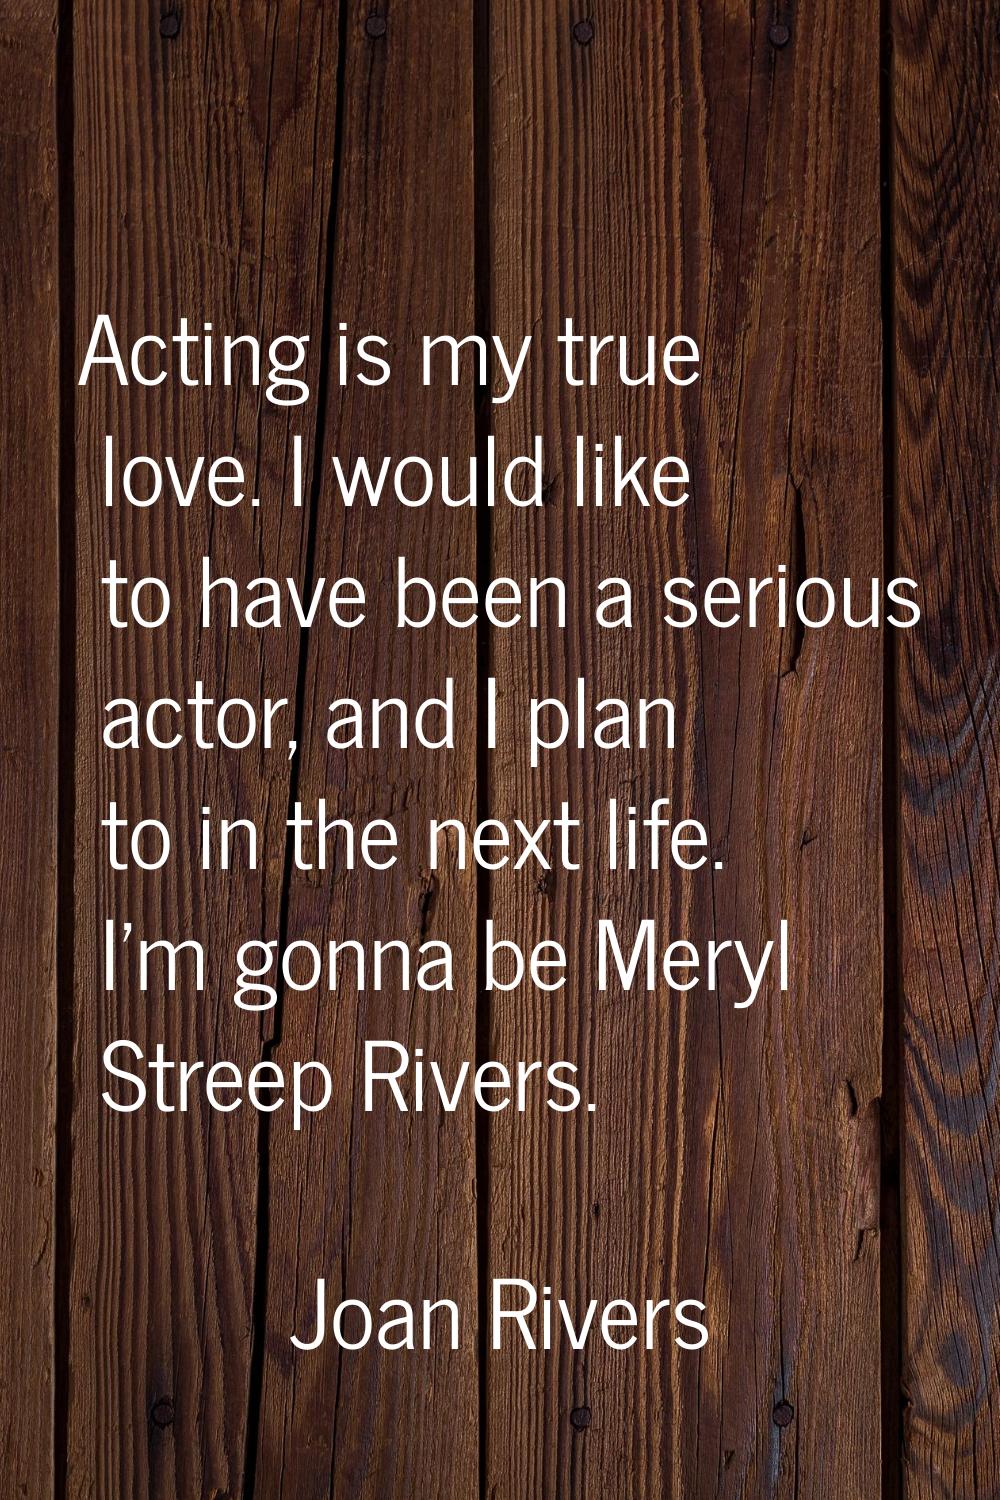 Acting is my true love. I would like to have been a serious actor, and I plan to in the next life. 